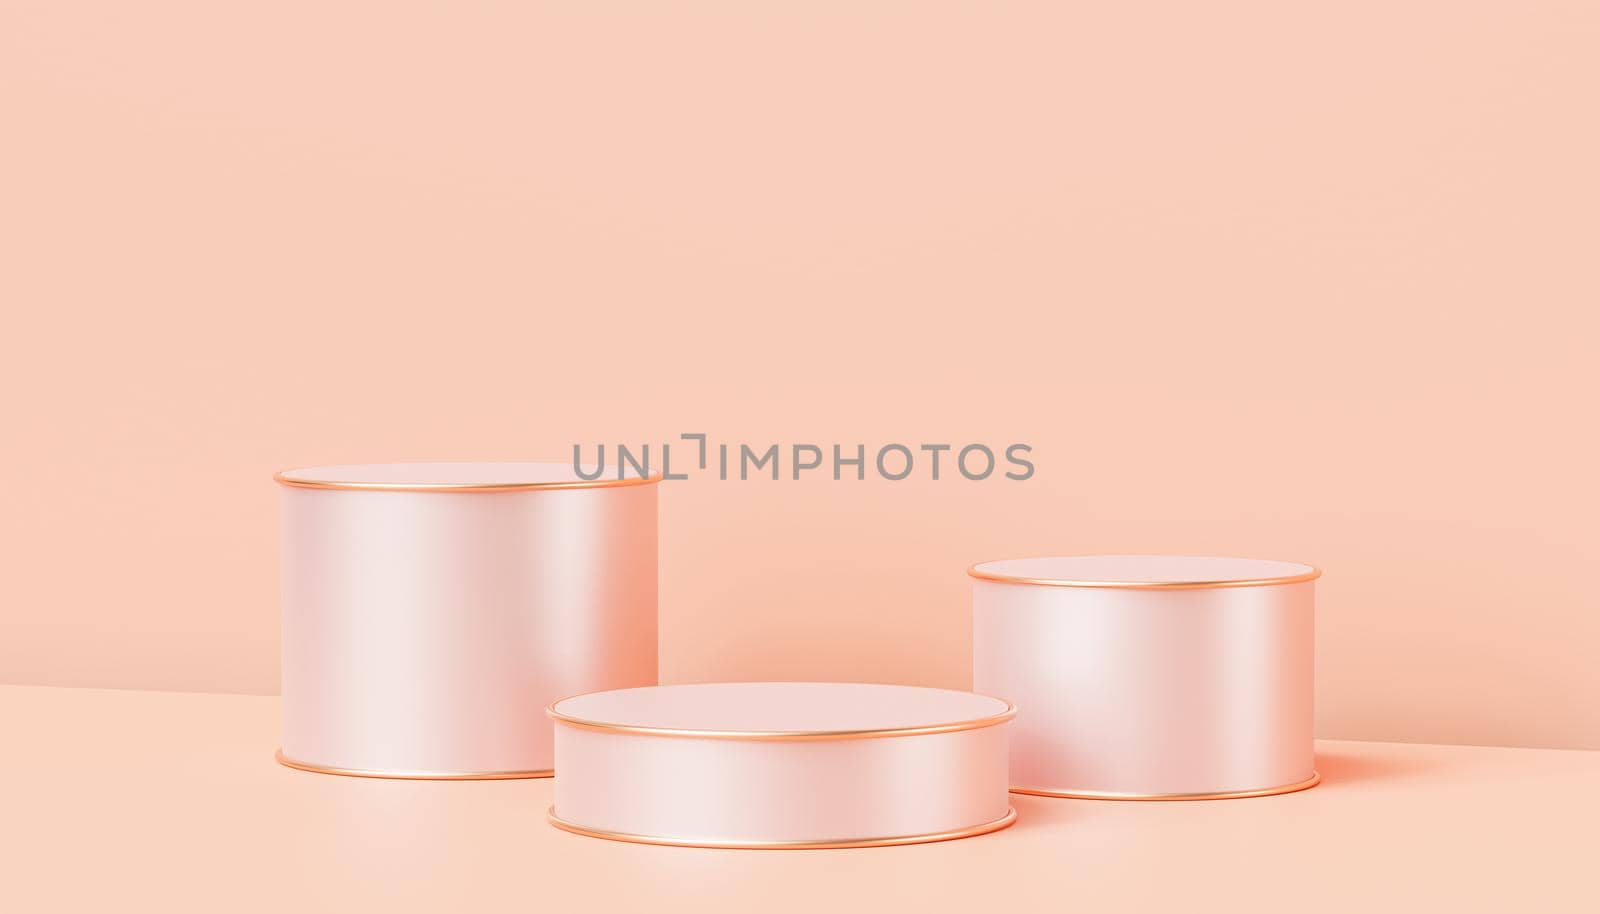 Beige luxury podiums or pedestals for products or advertising on pastel peach colored background, 3d render by Frostroomhead